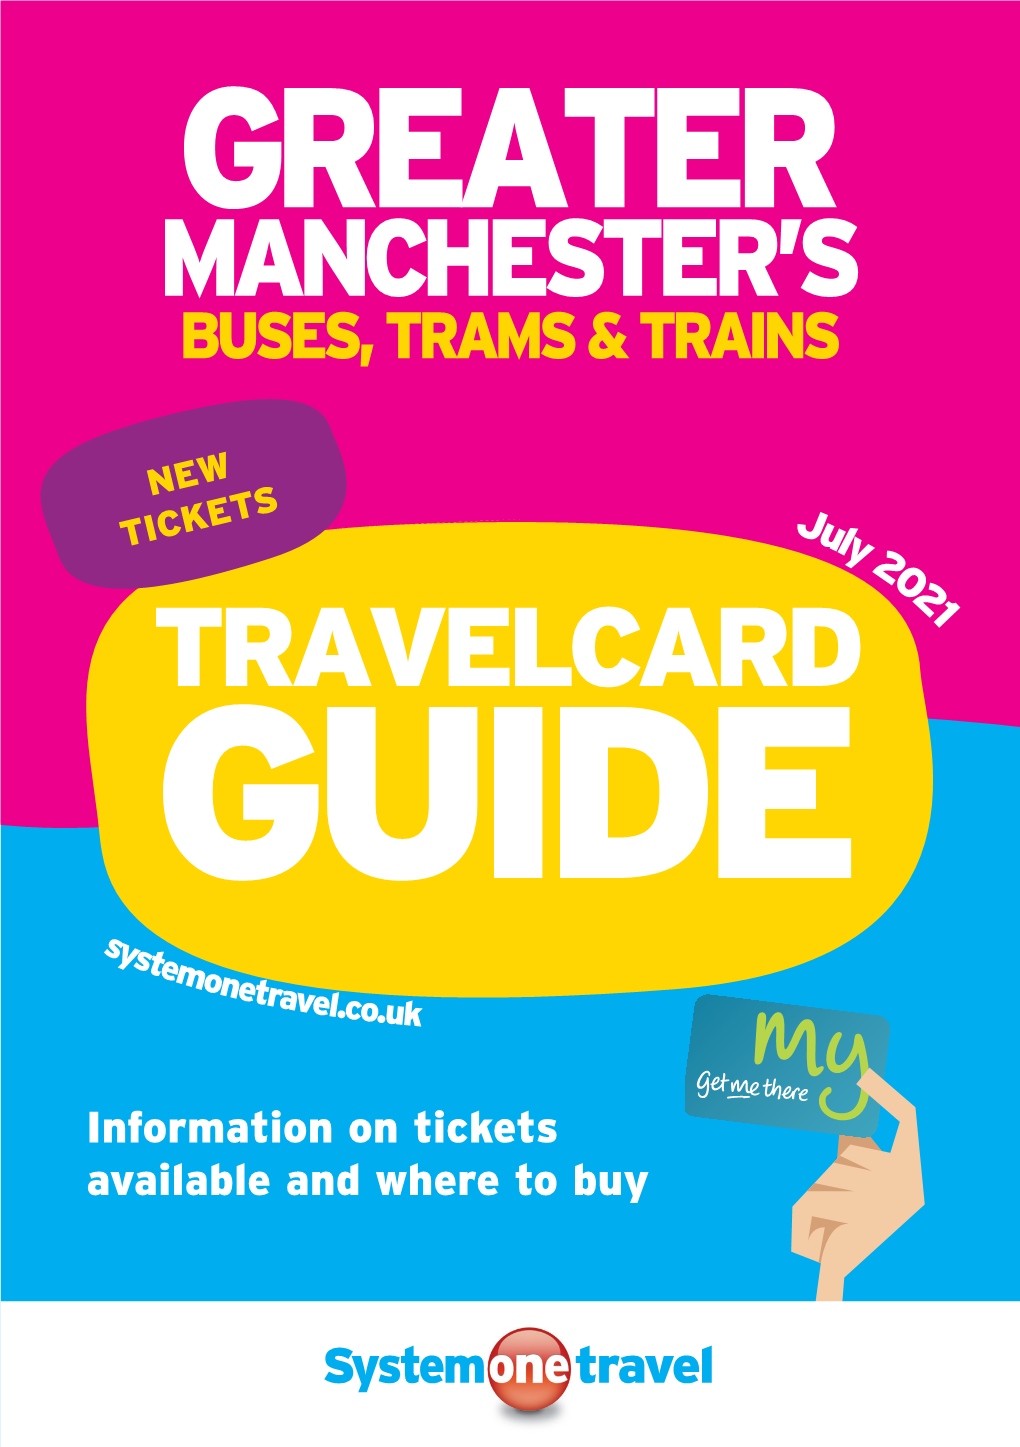 TRAVELCARD 1 GUIDE S Yst Emo Netra Vel.Co.Uk